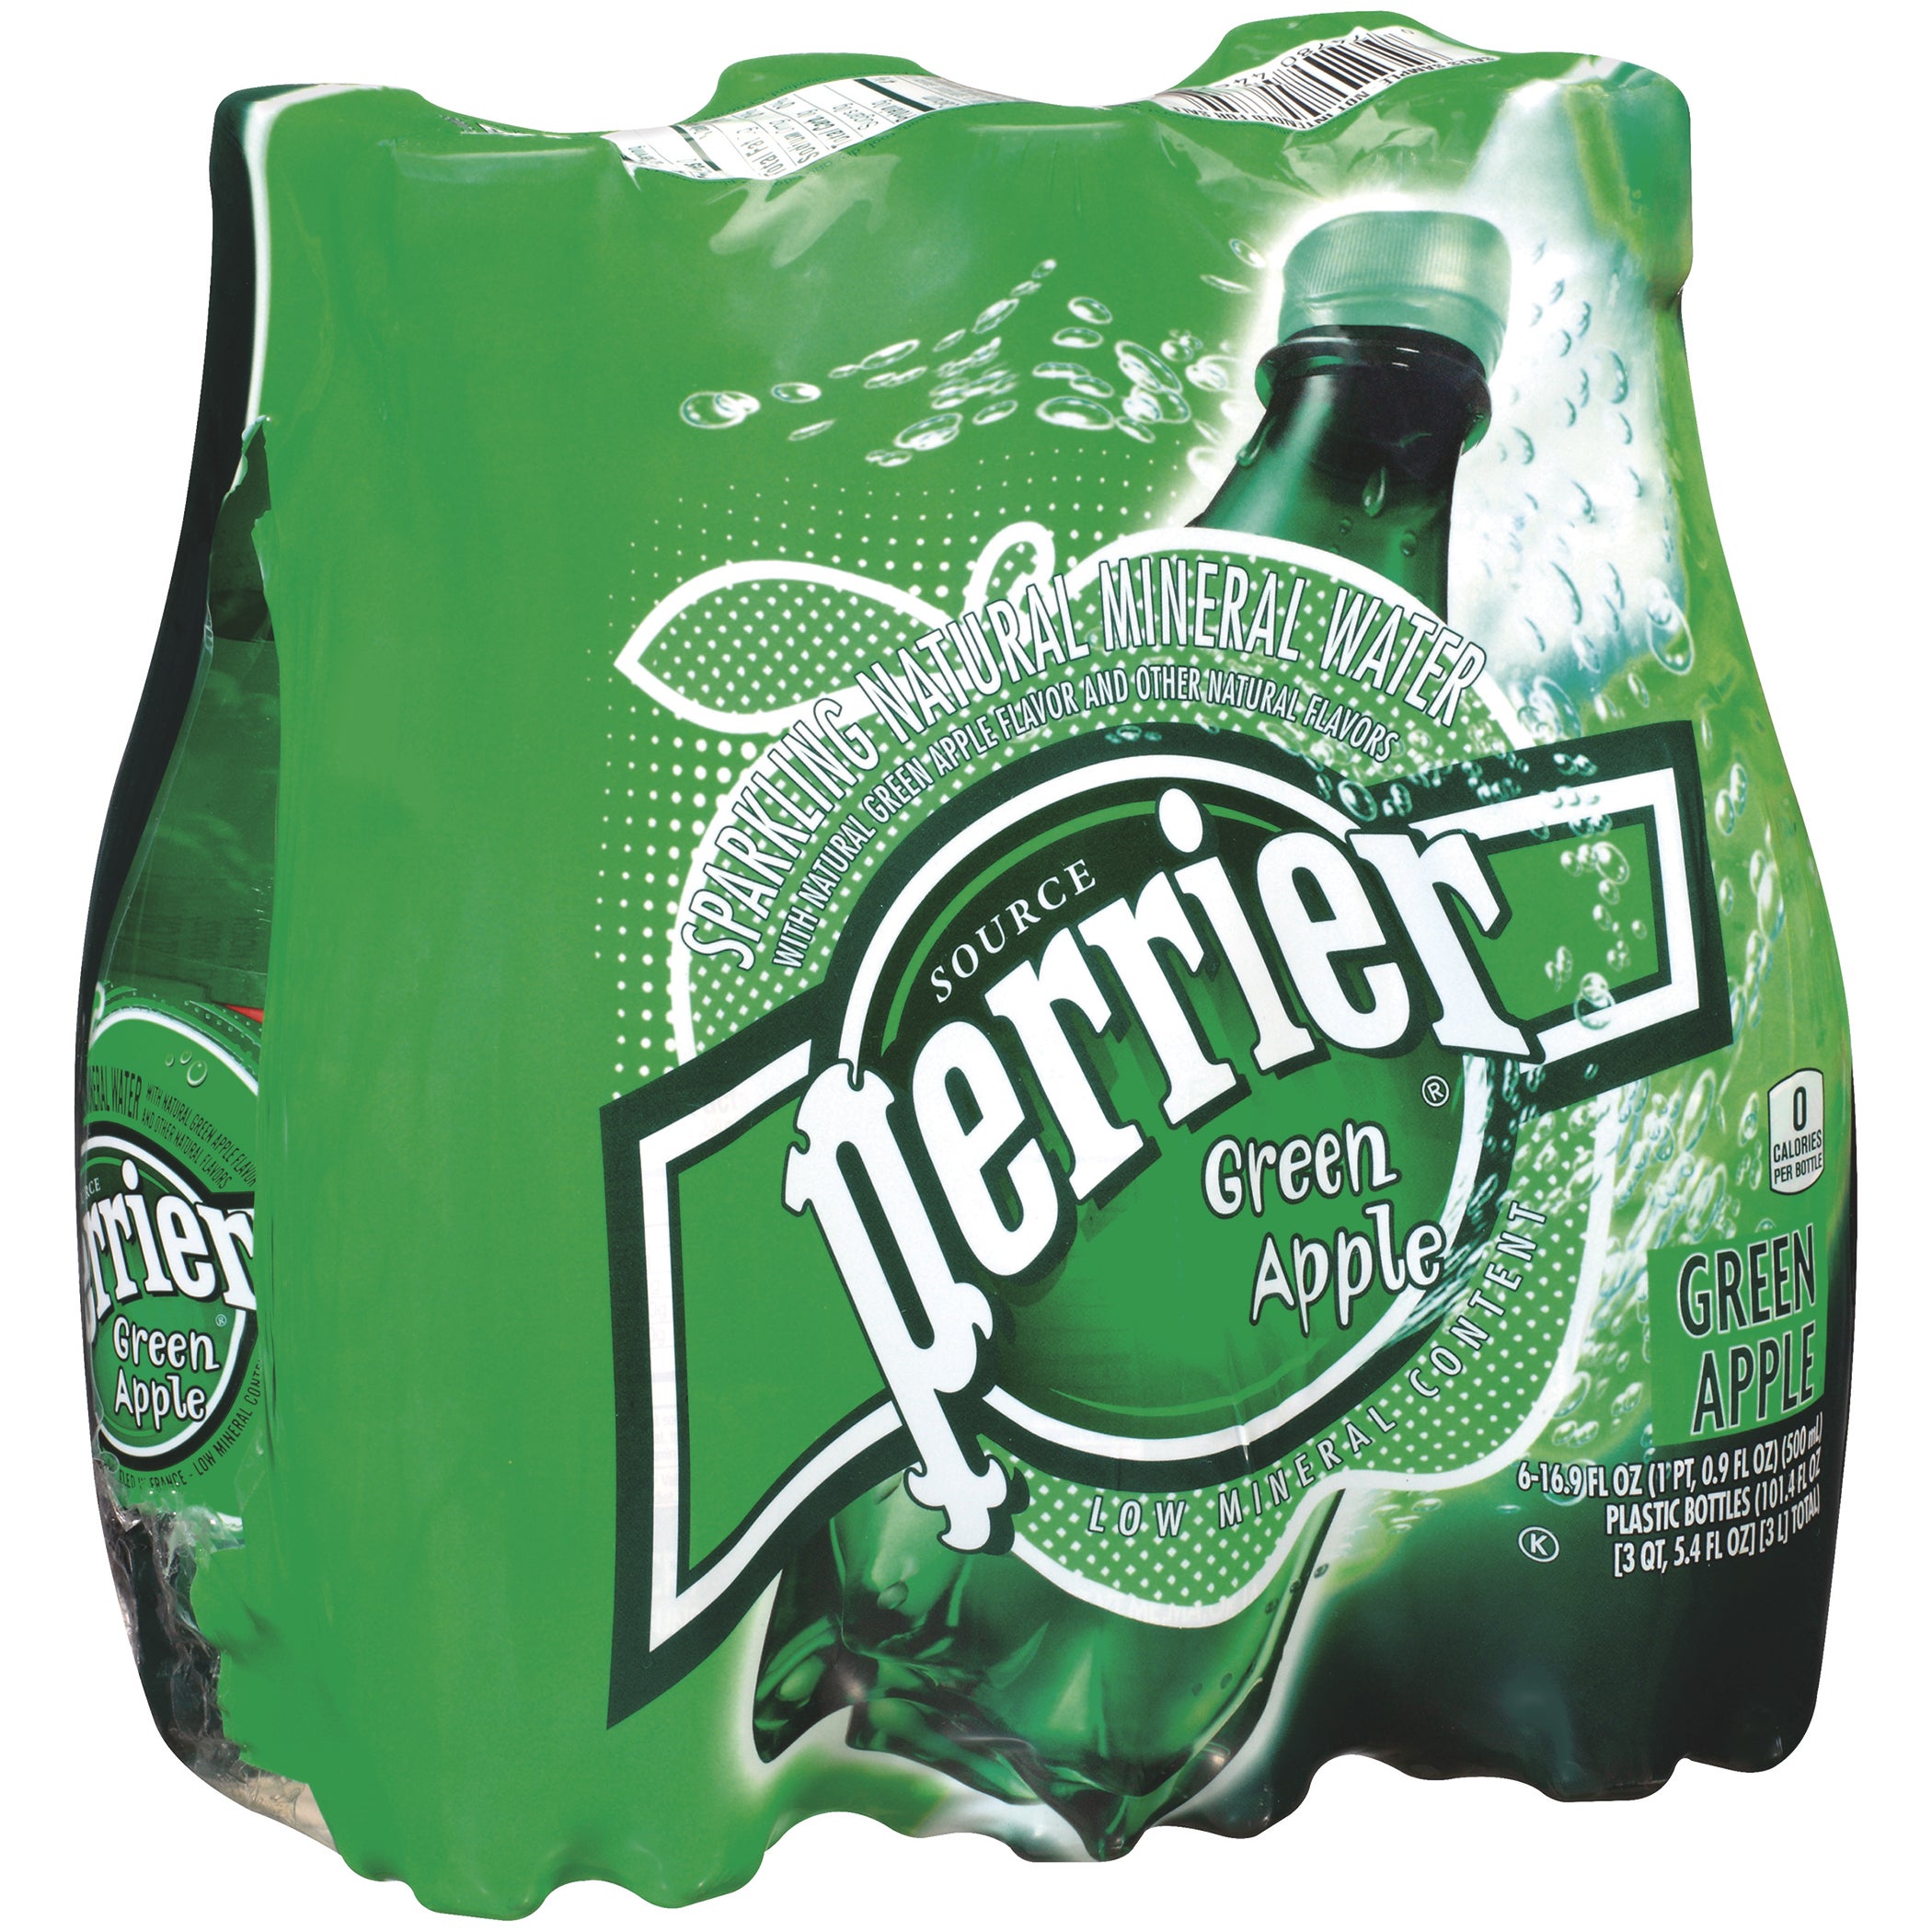 Perrier Green Apple Sparkling Water